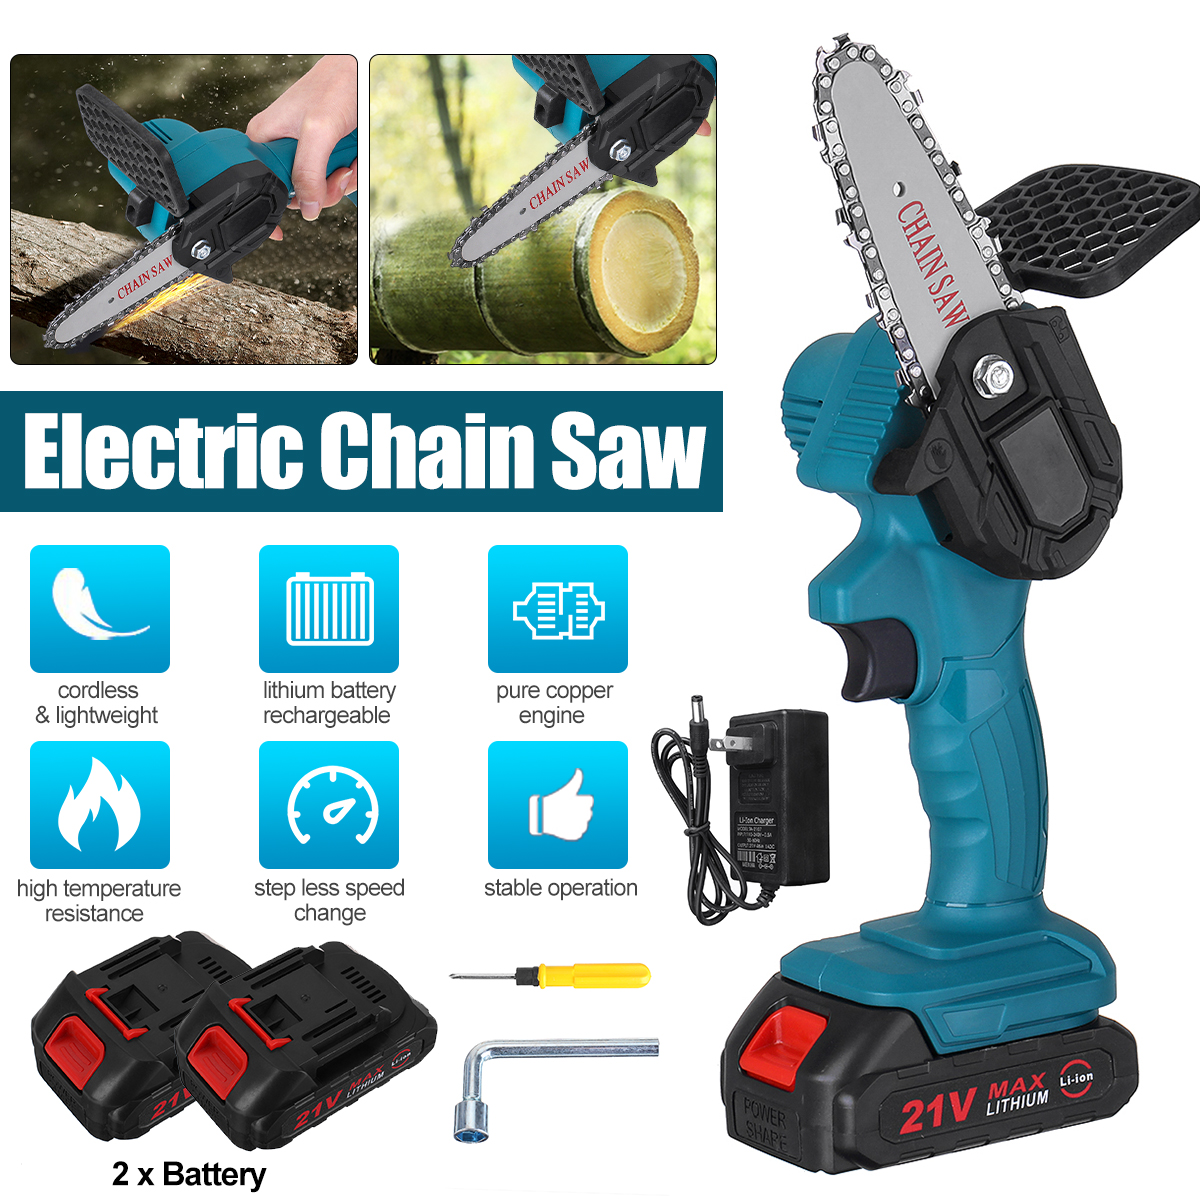 4-Inch-21V-Cordless-Electric-Chain-Saw-W-01pc2pcs-Batteries-For-Tree-Branch-Wood-Cutting-Tool-1804698-2